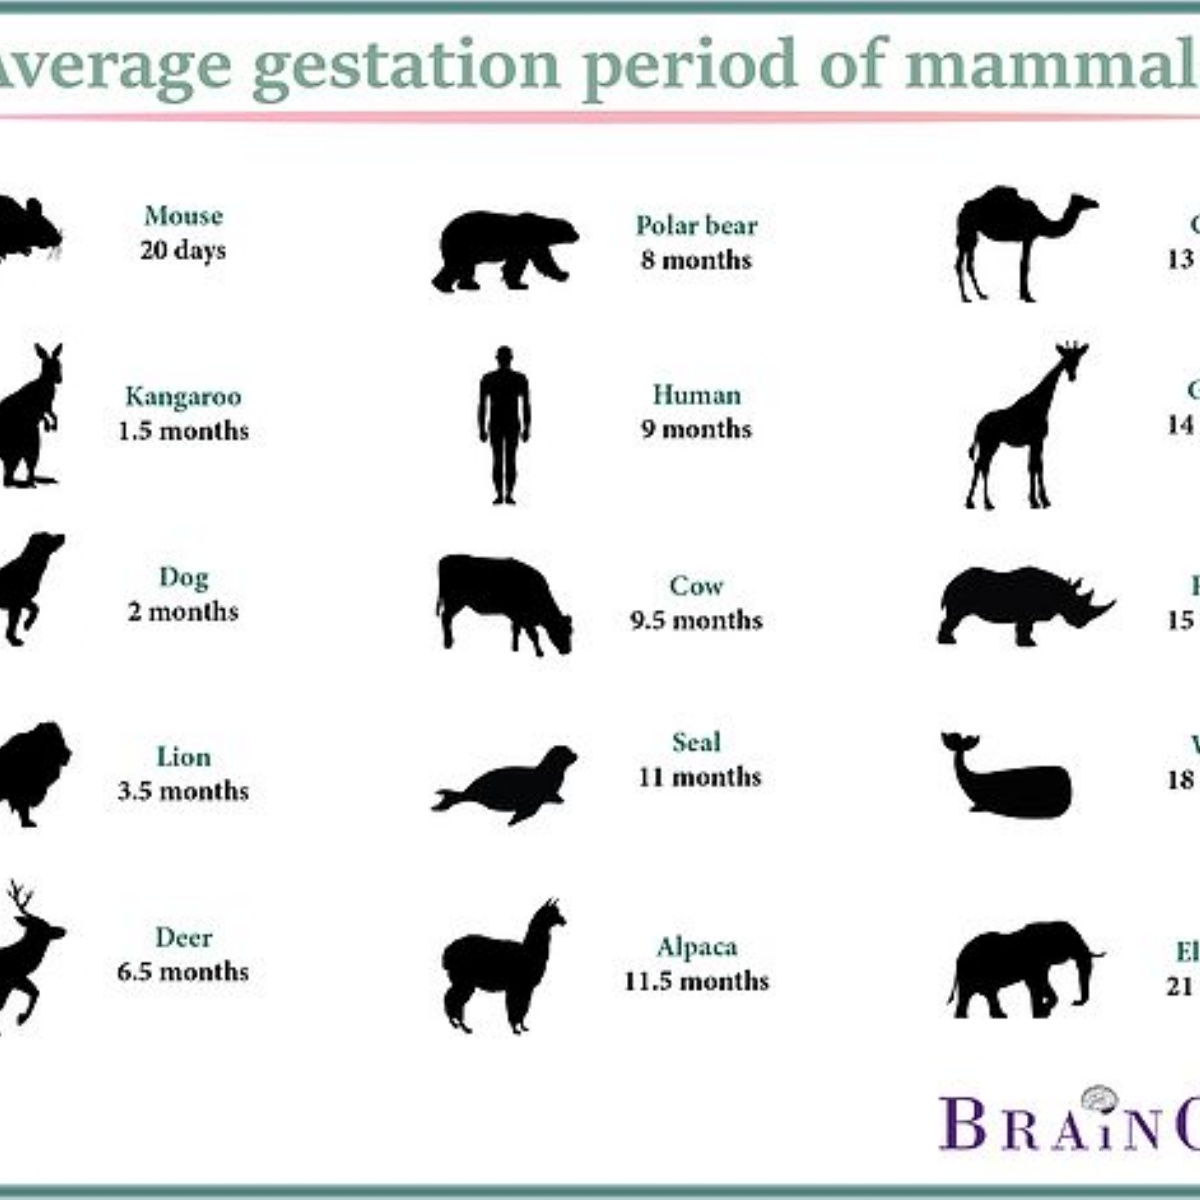 the gestation perod for all mammals is